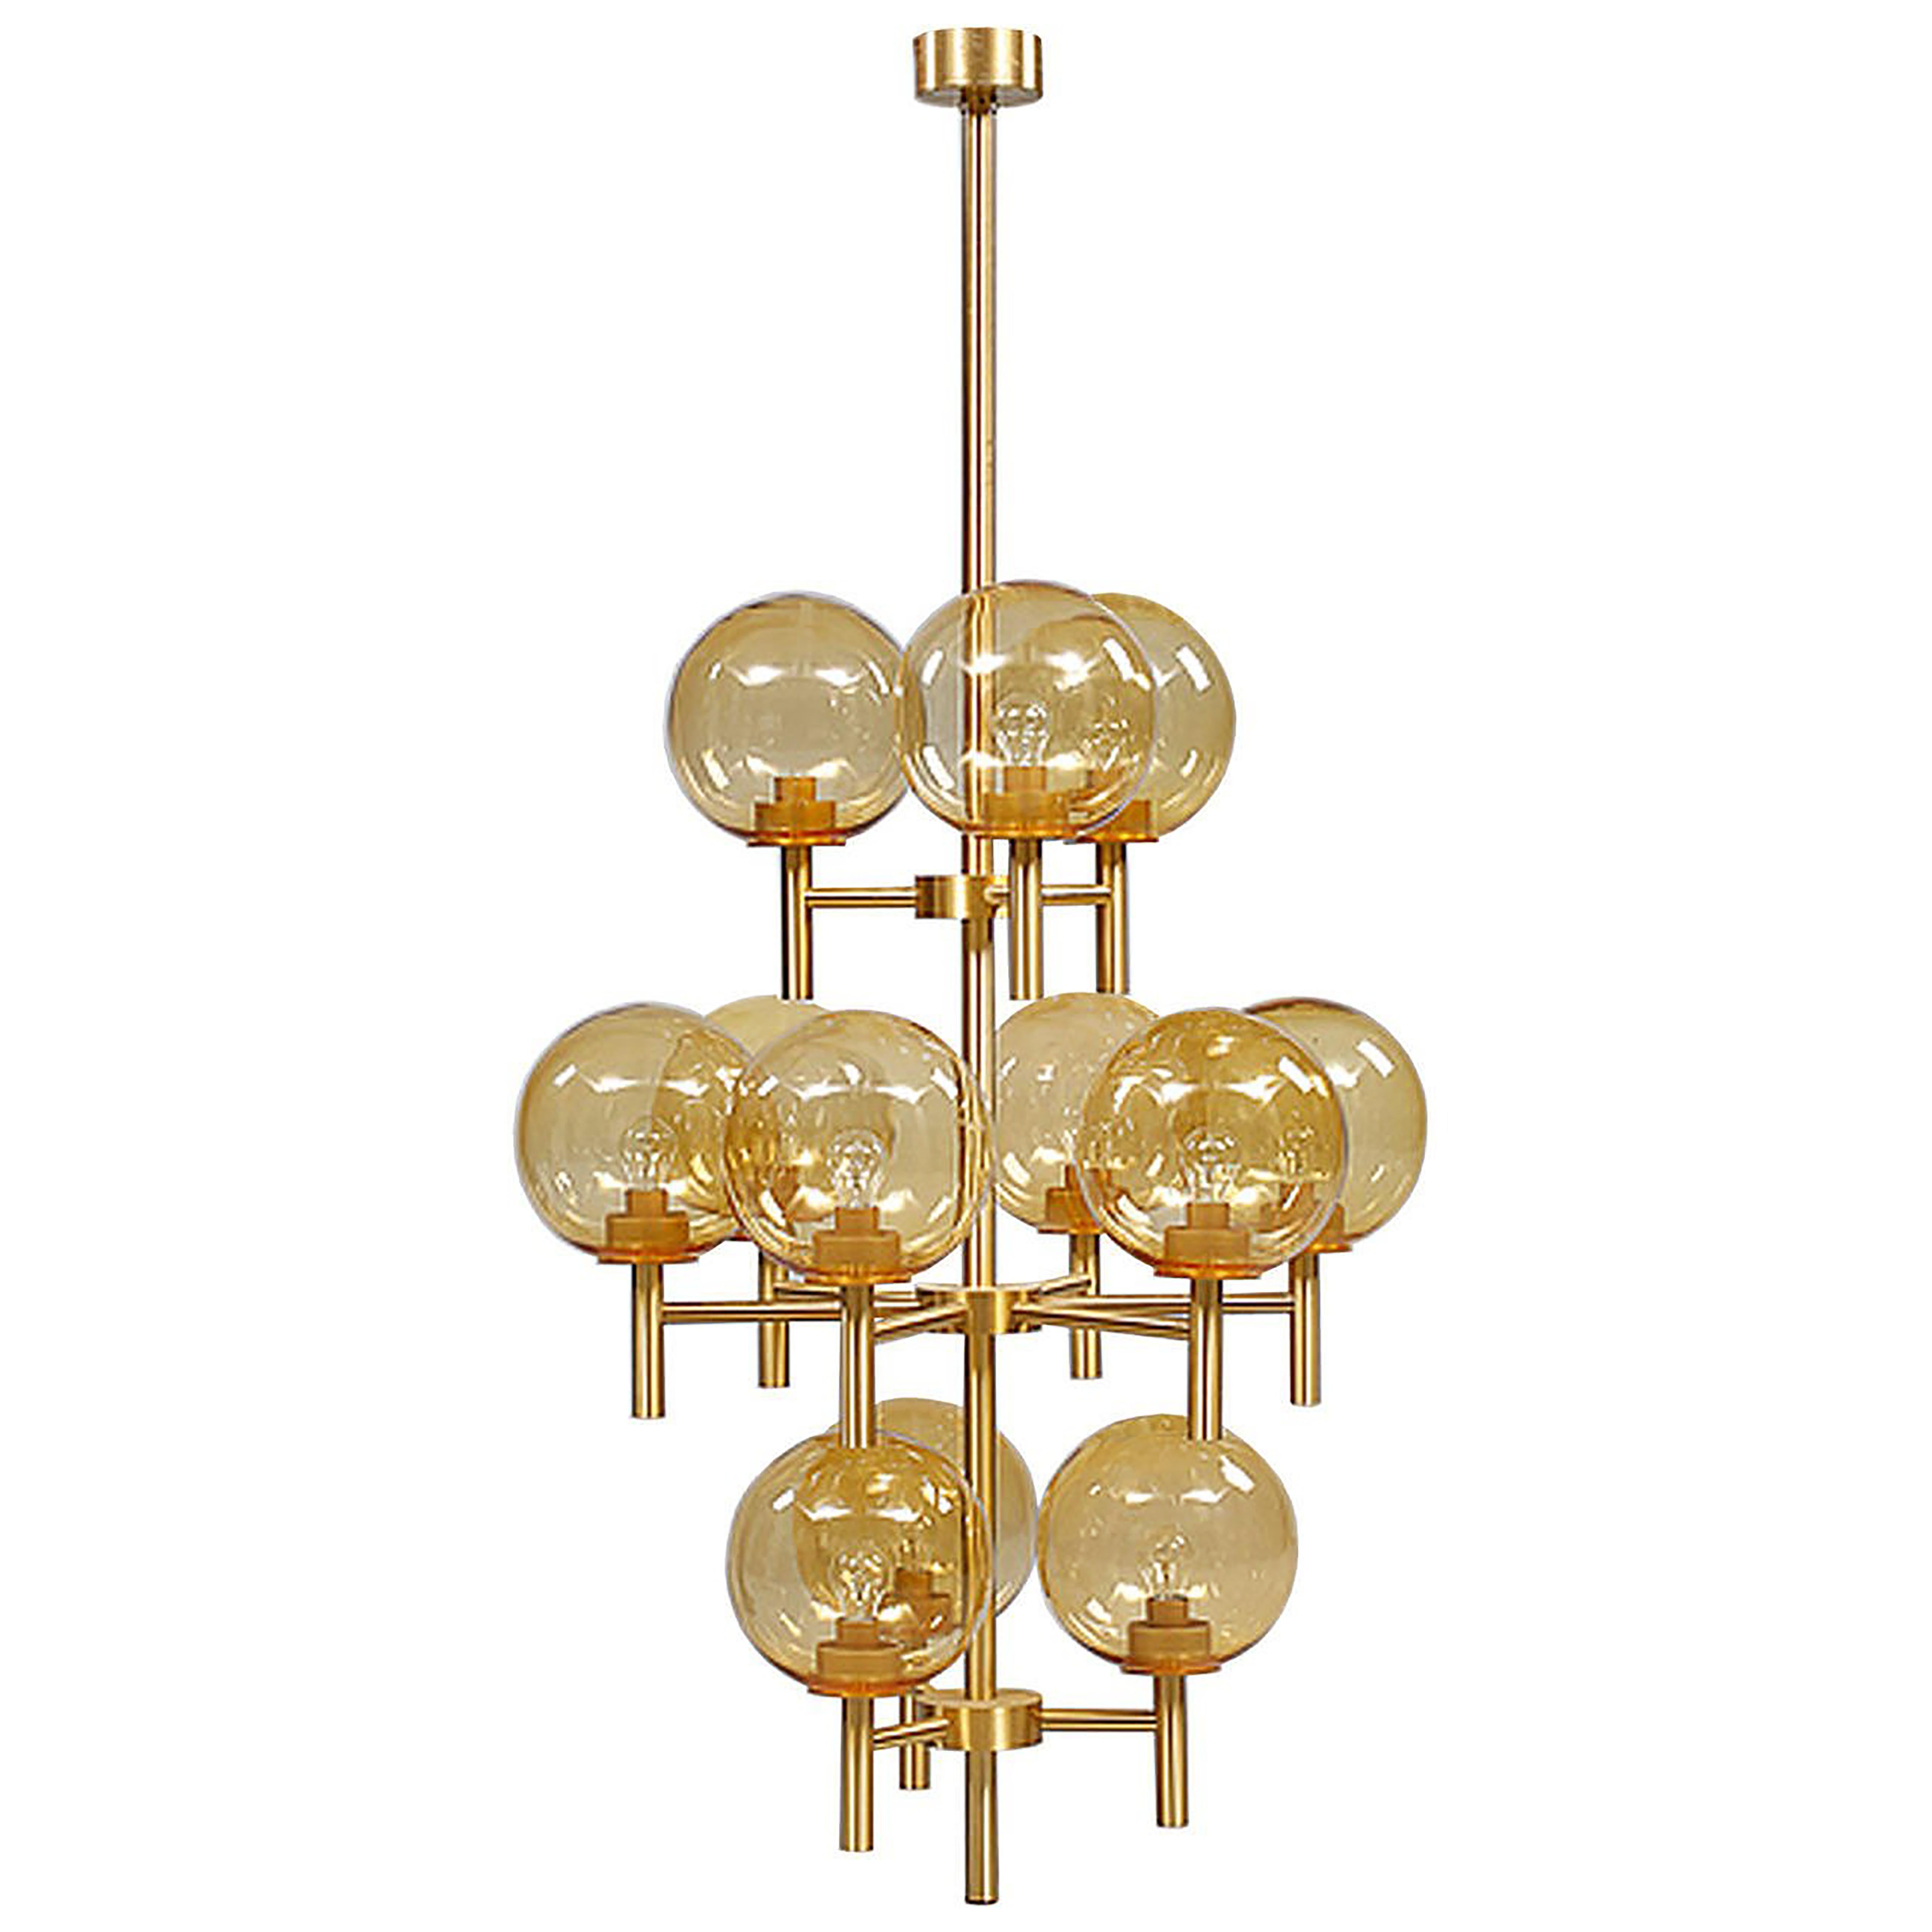 Brass and Glass Chandelier by Uno & Osten Kristiansson In Excellent Condition For Sale In New York, NY